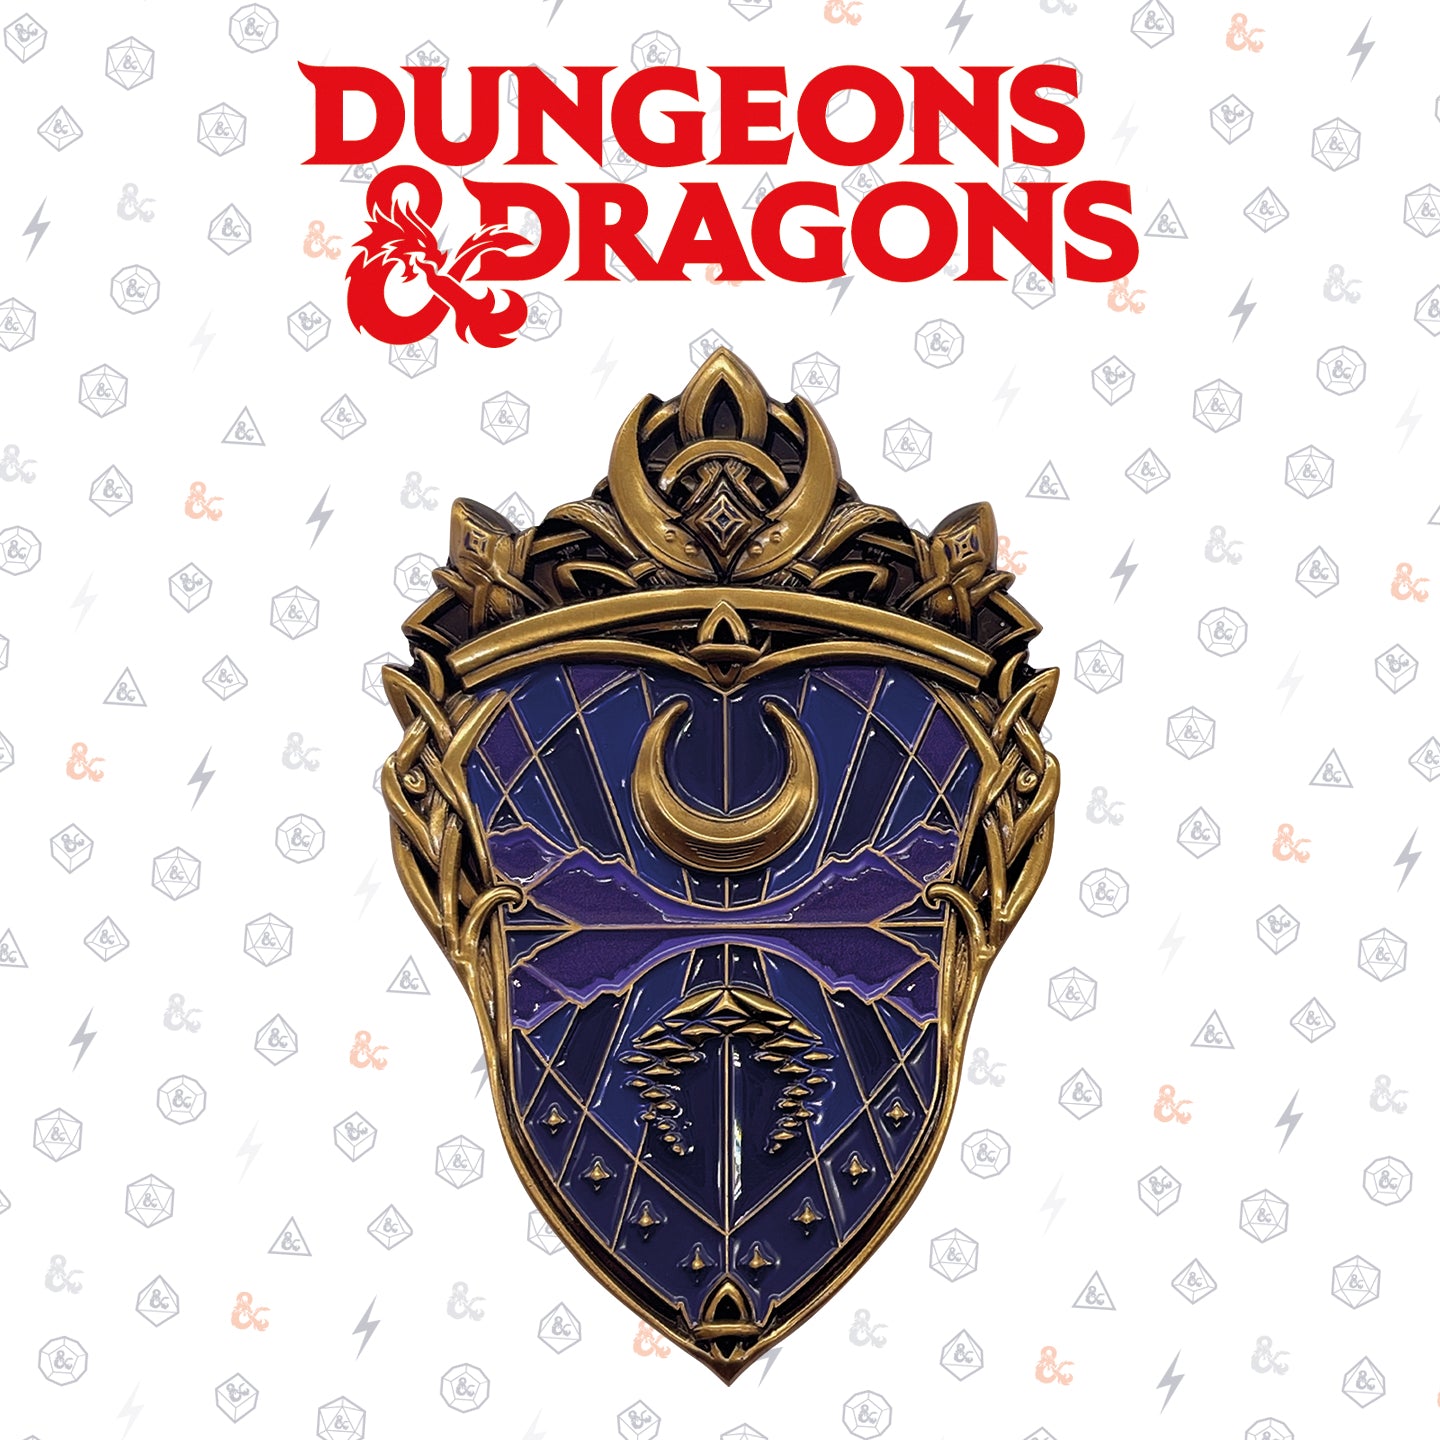 Dungeons & Dragons Limited Edition Waterdeep Replica Badge